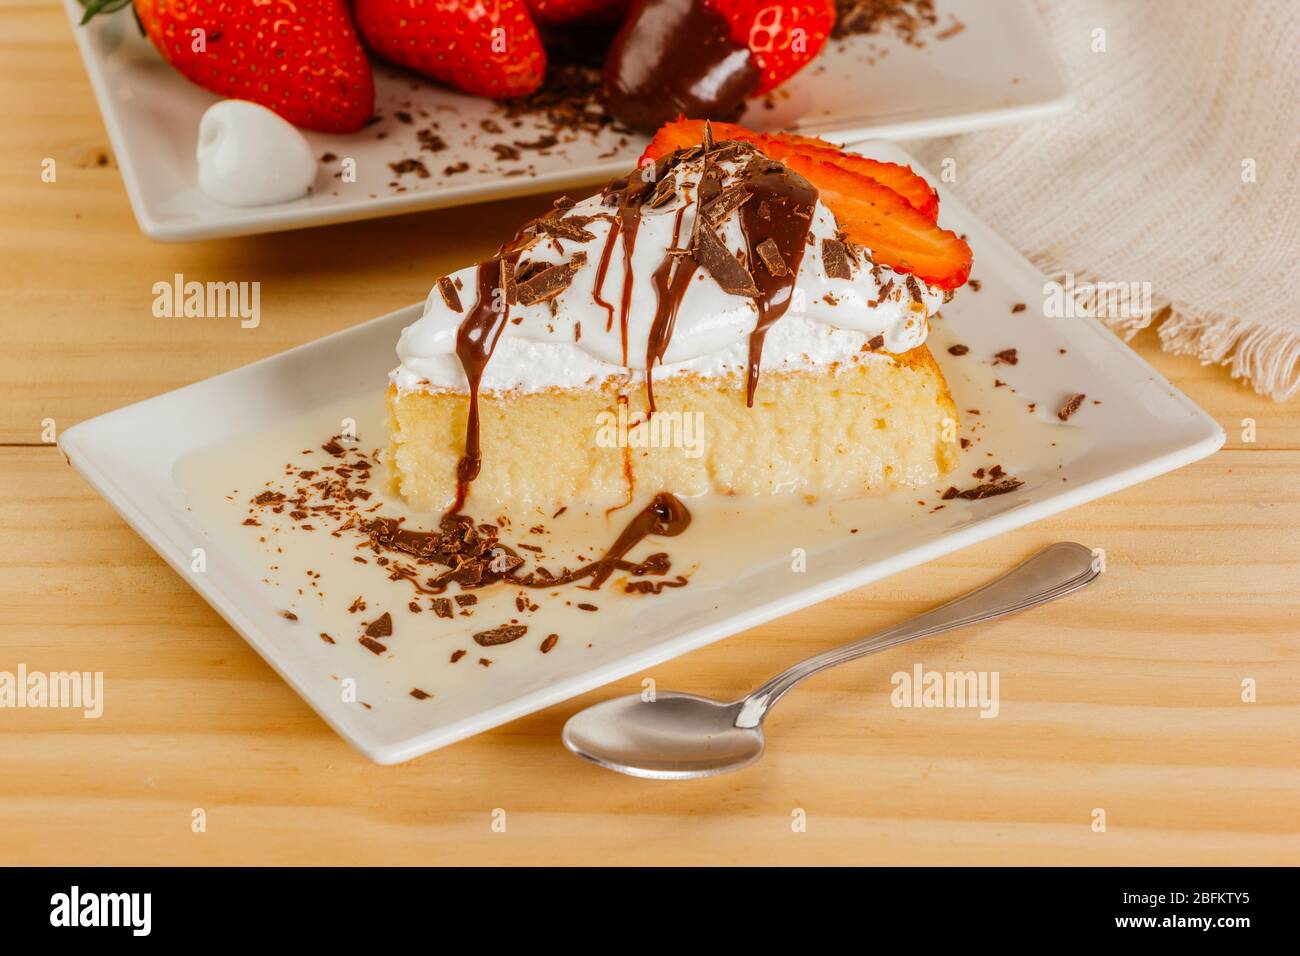 Three milk cake with chocolate syrup and some strawberries Stock Photo